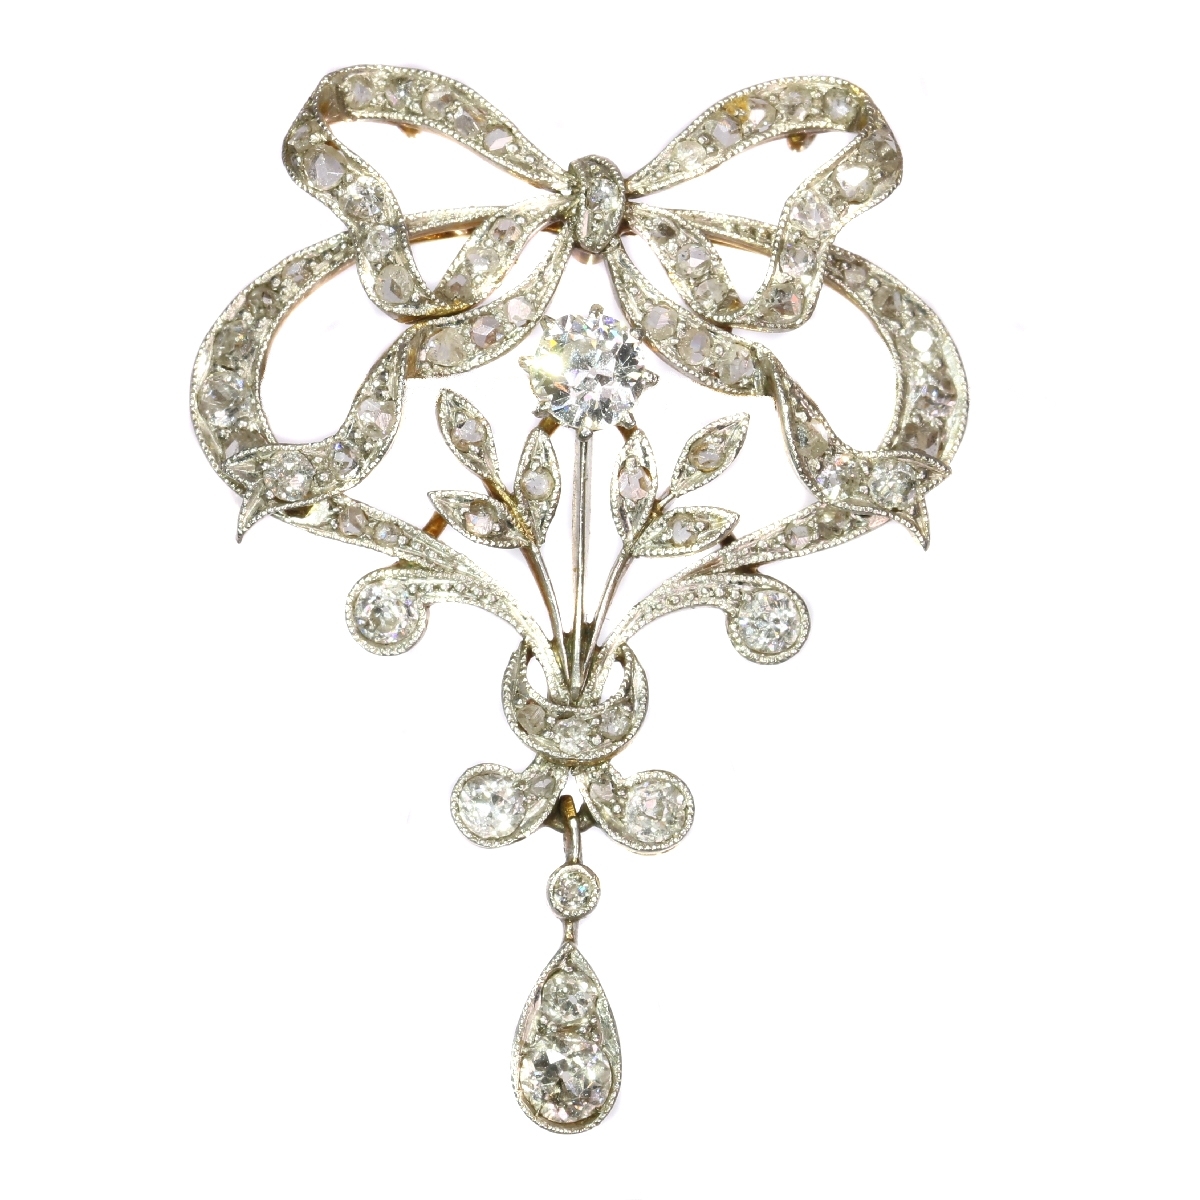 Belle Epoque brooch and pendant in guirland style with 72 diamonds